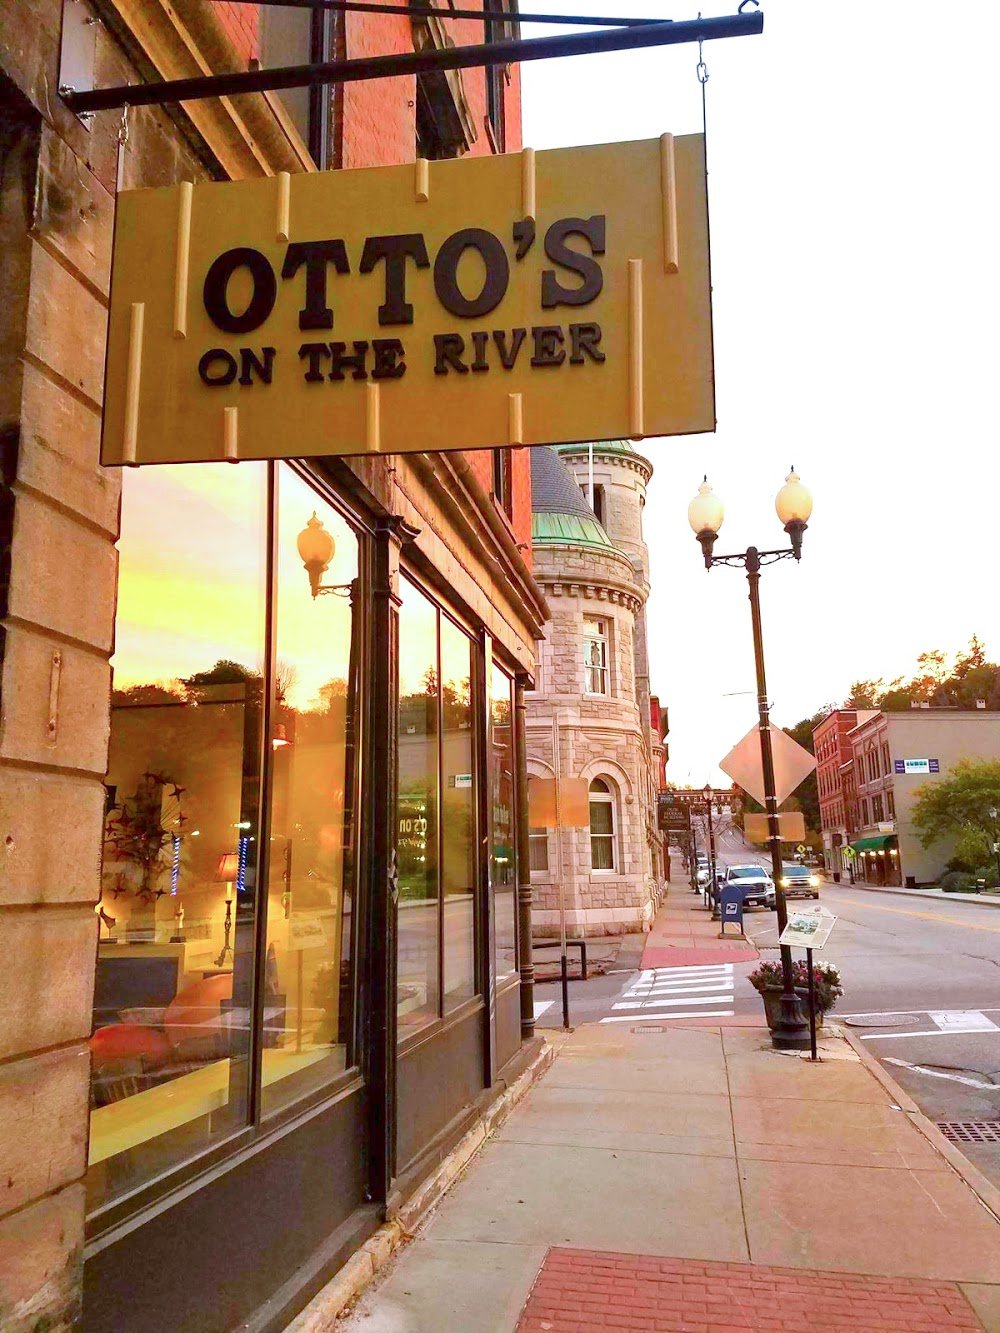 Otto’s on the River